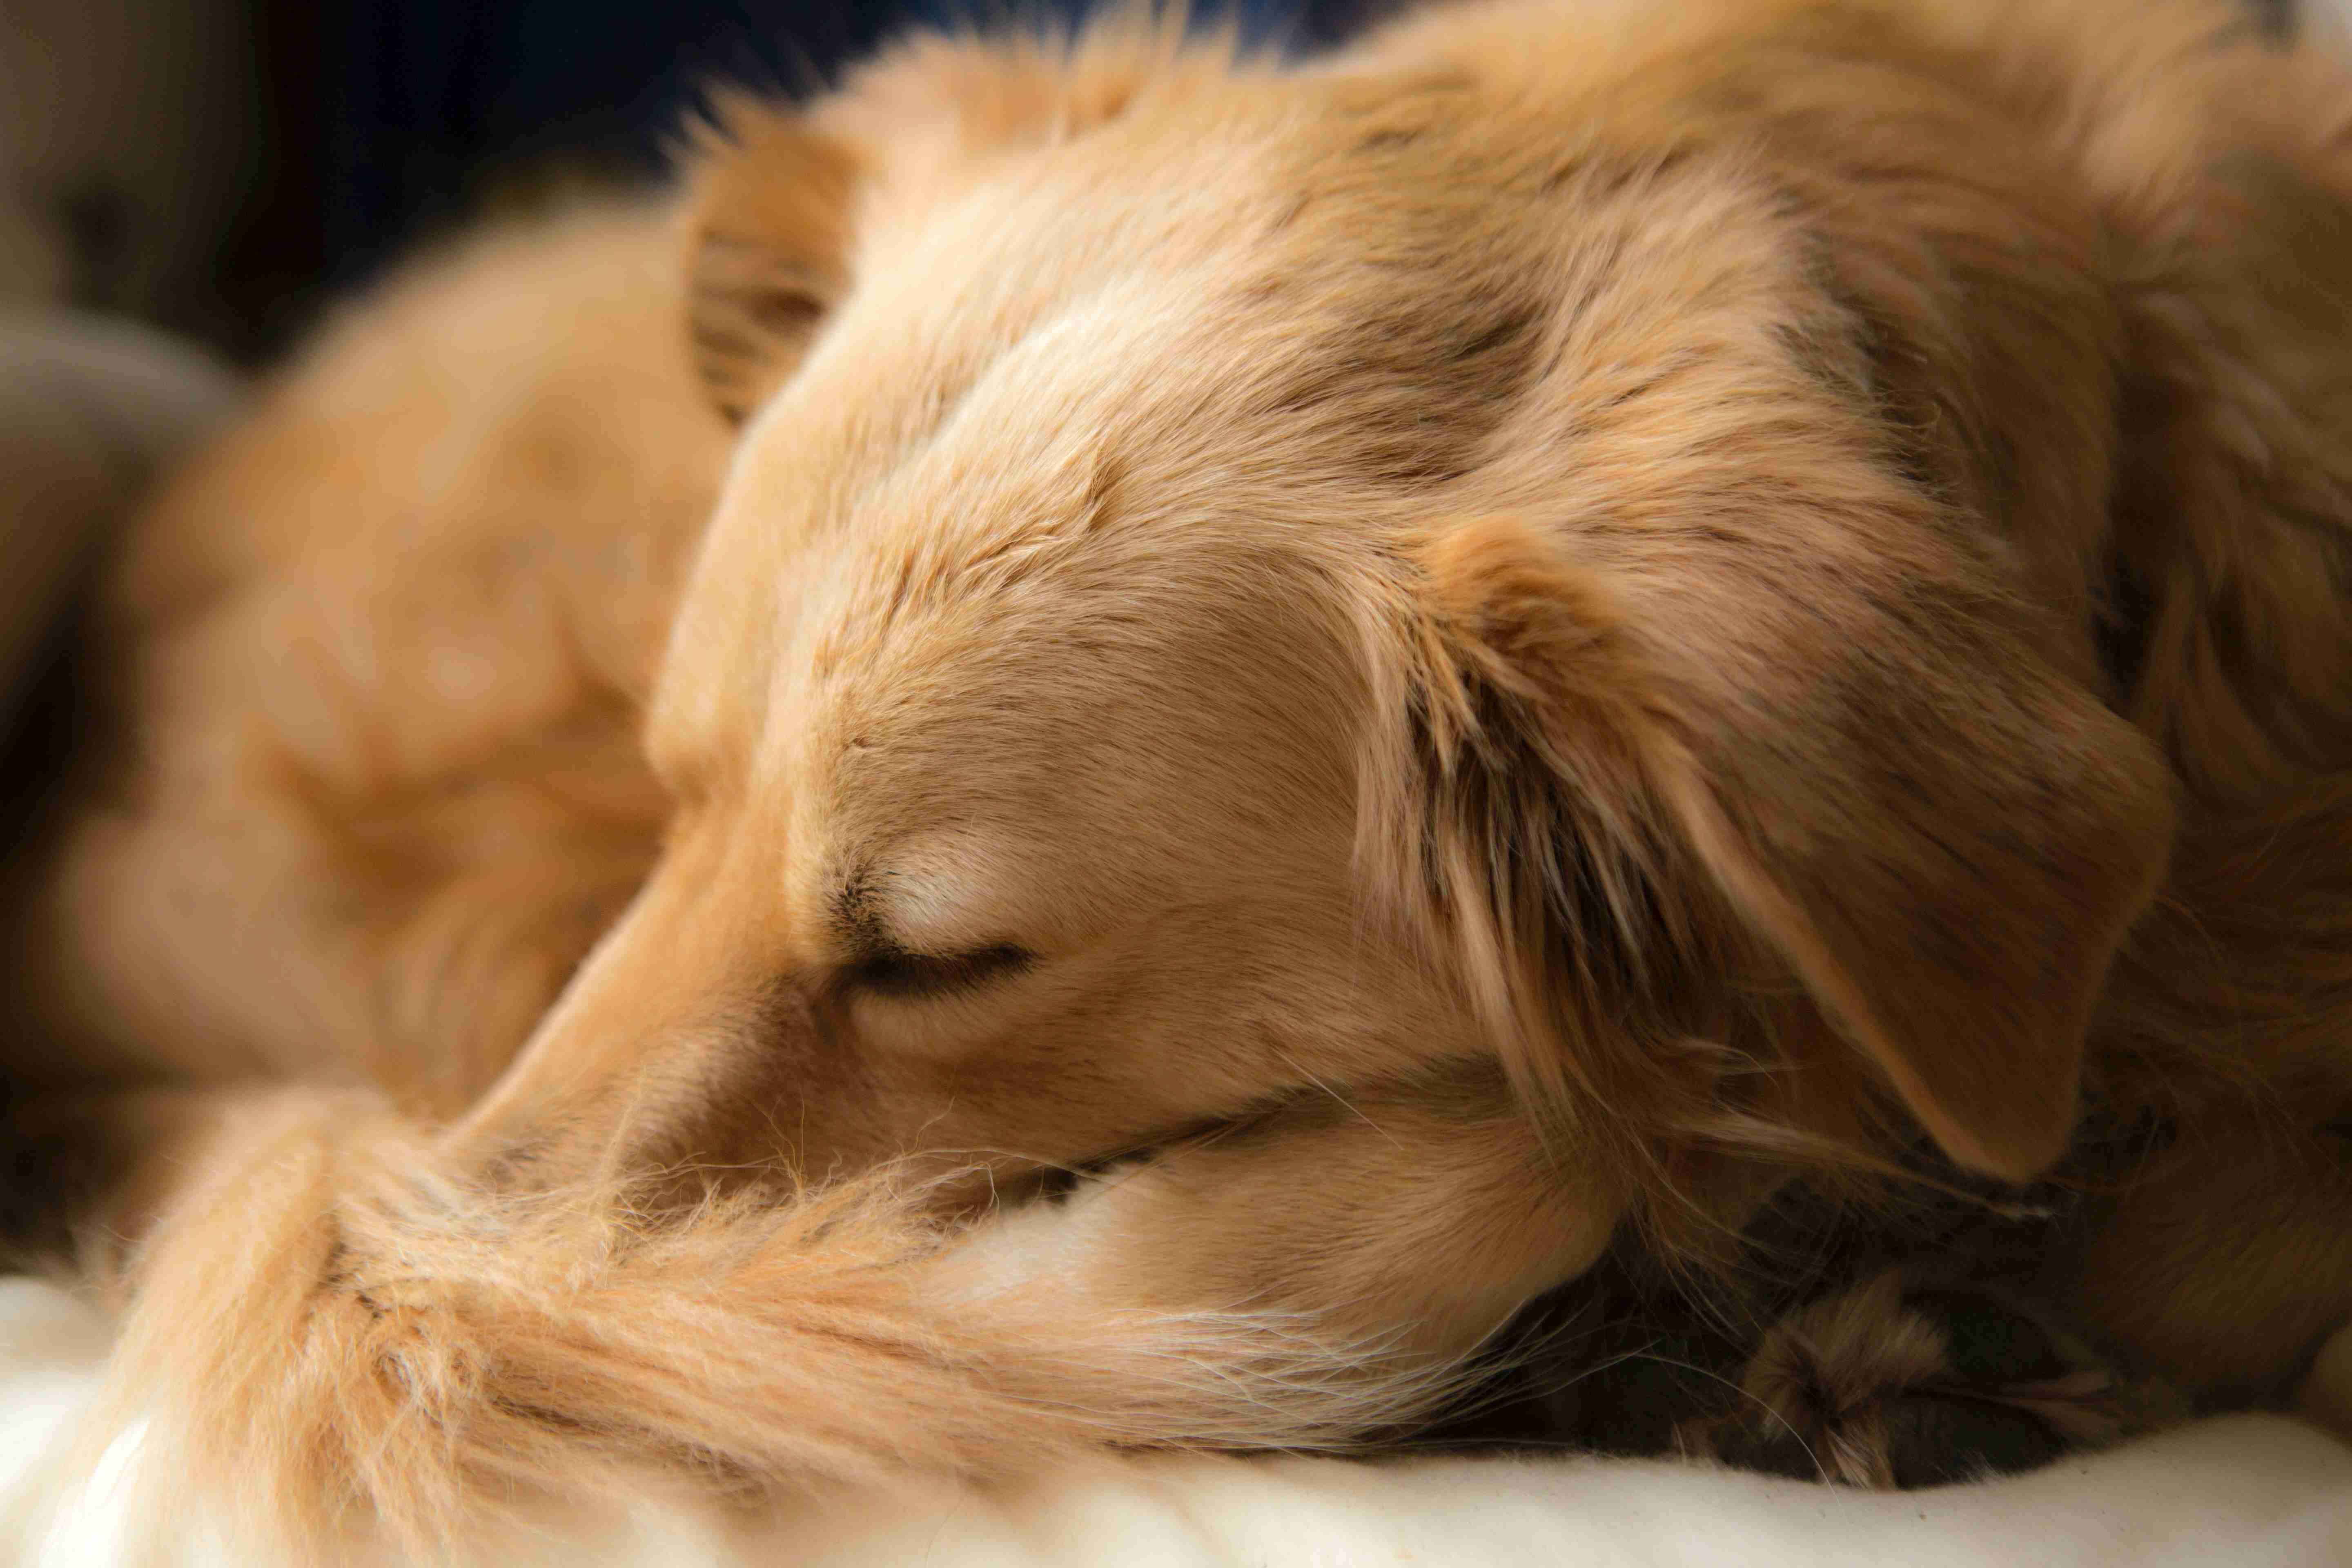 What are some signs of heart disease in golden retrievers?